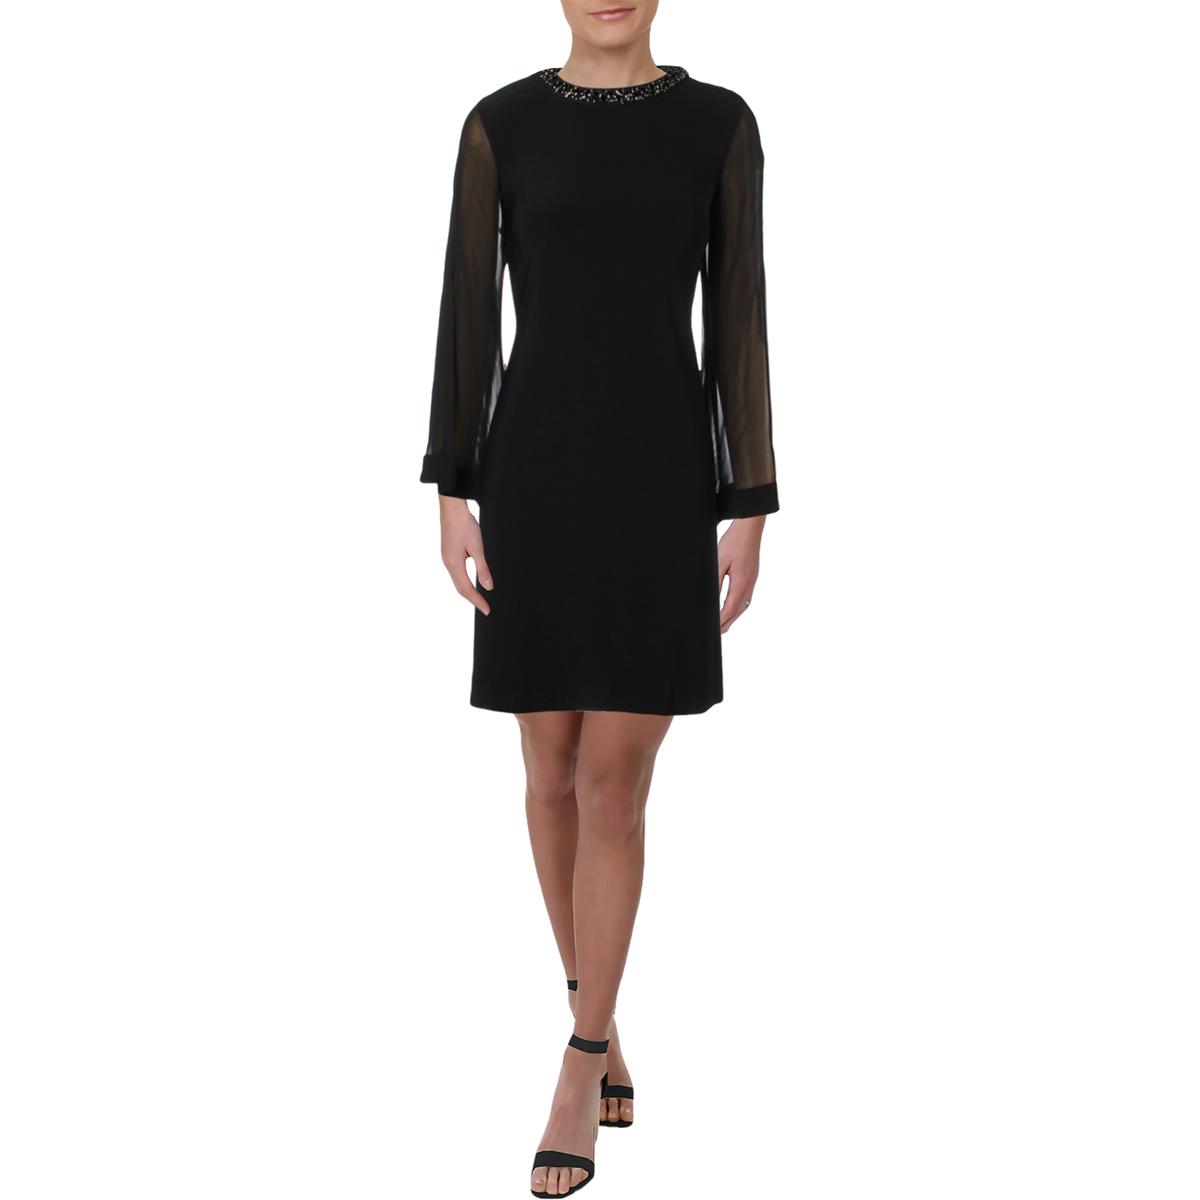 MSK Womens Black Embellished Long Sleeves Cocktail Party Dress 6 BHFO ...